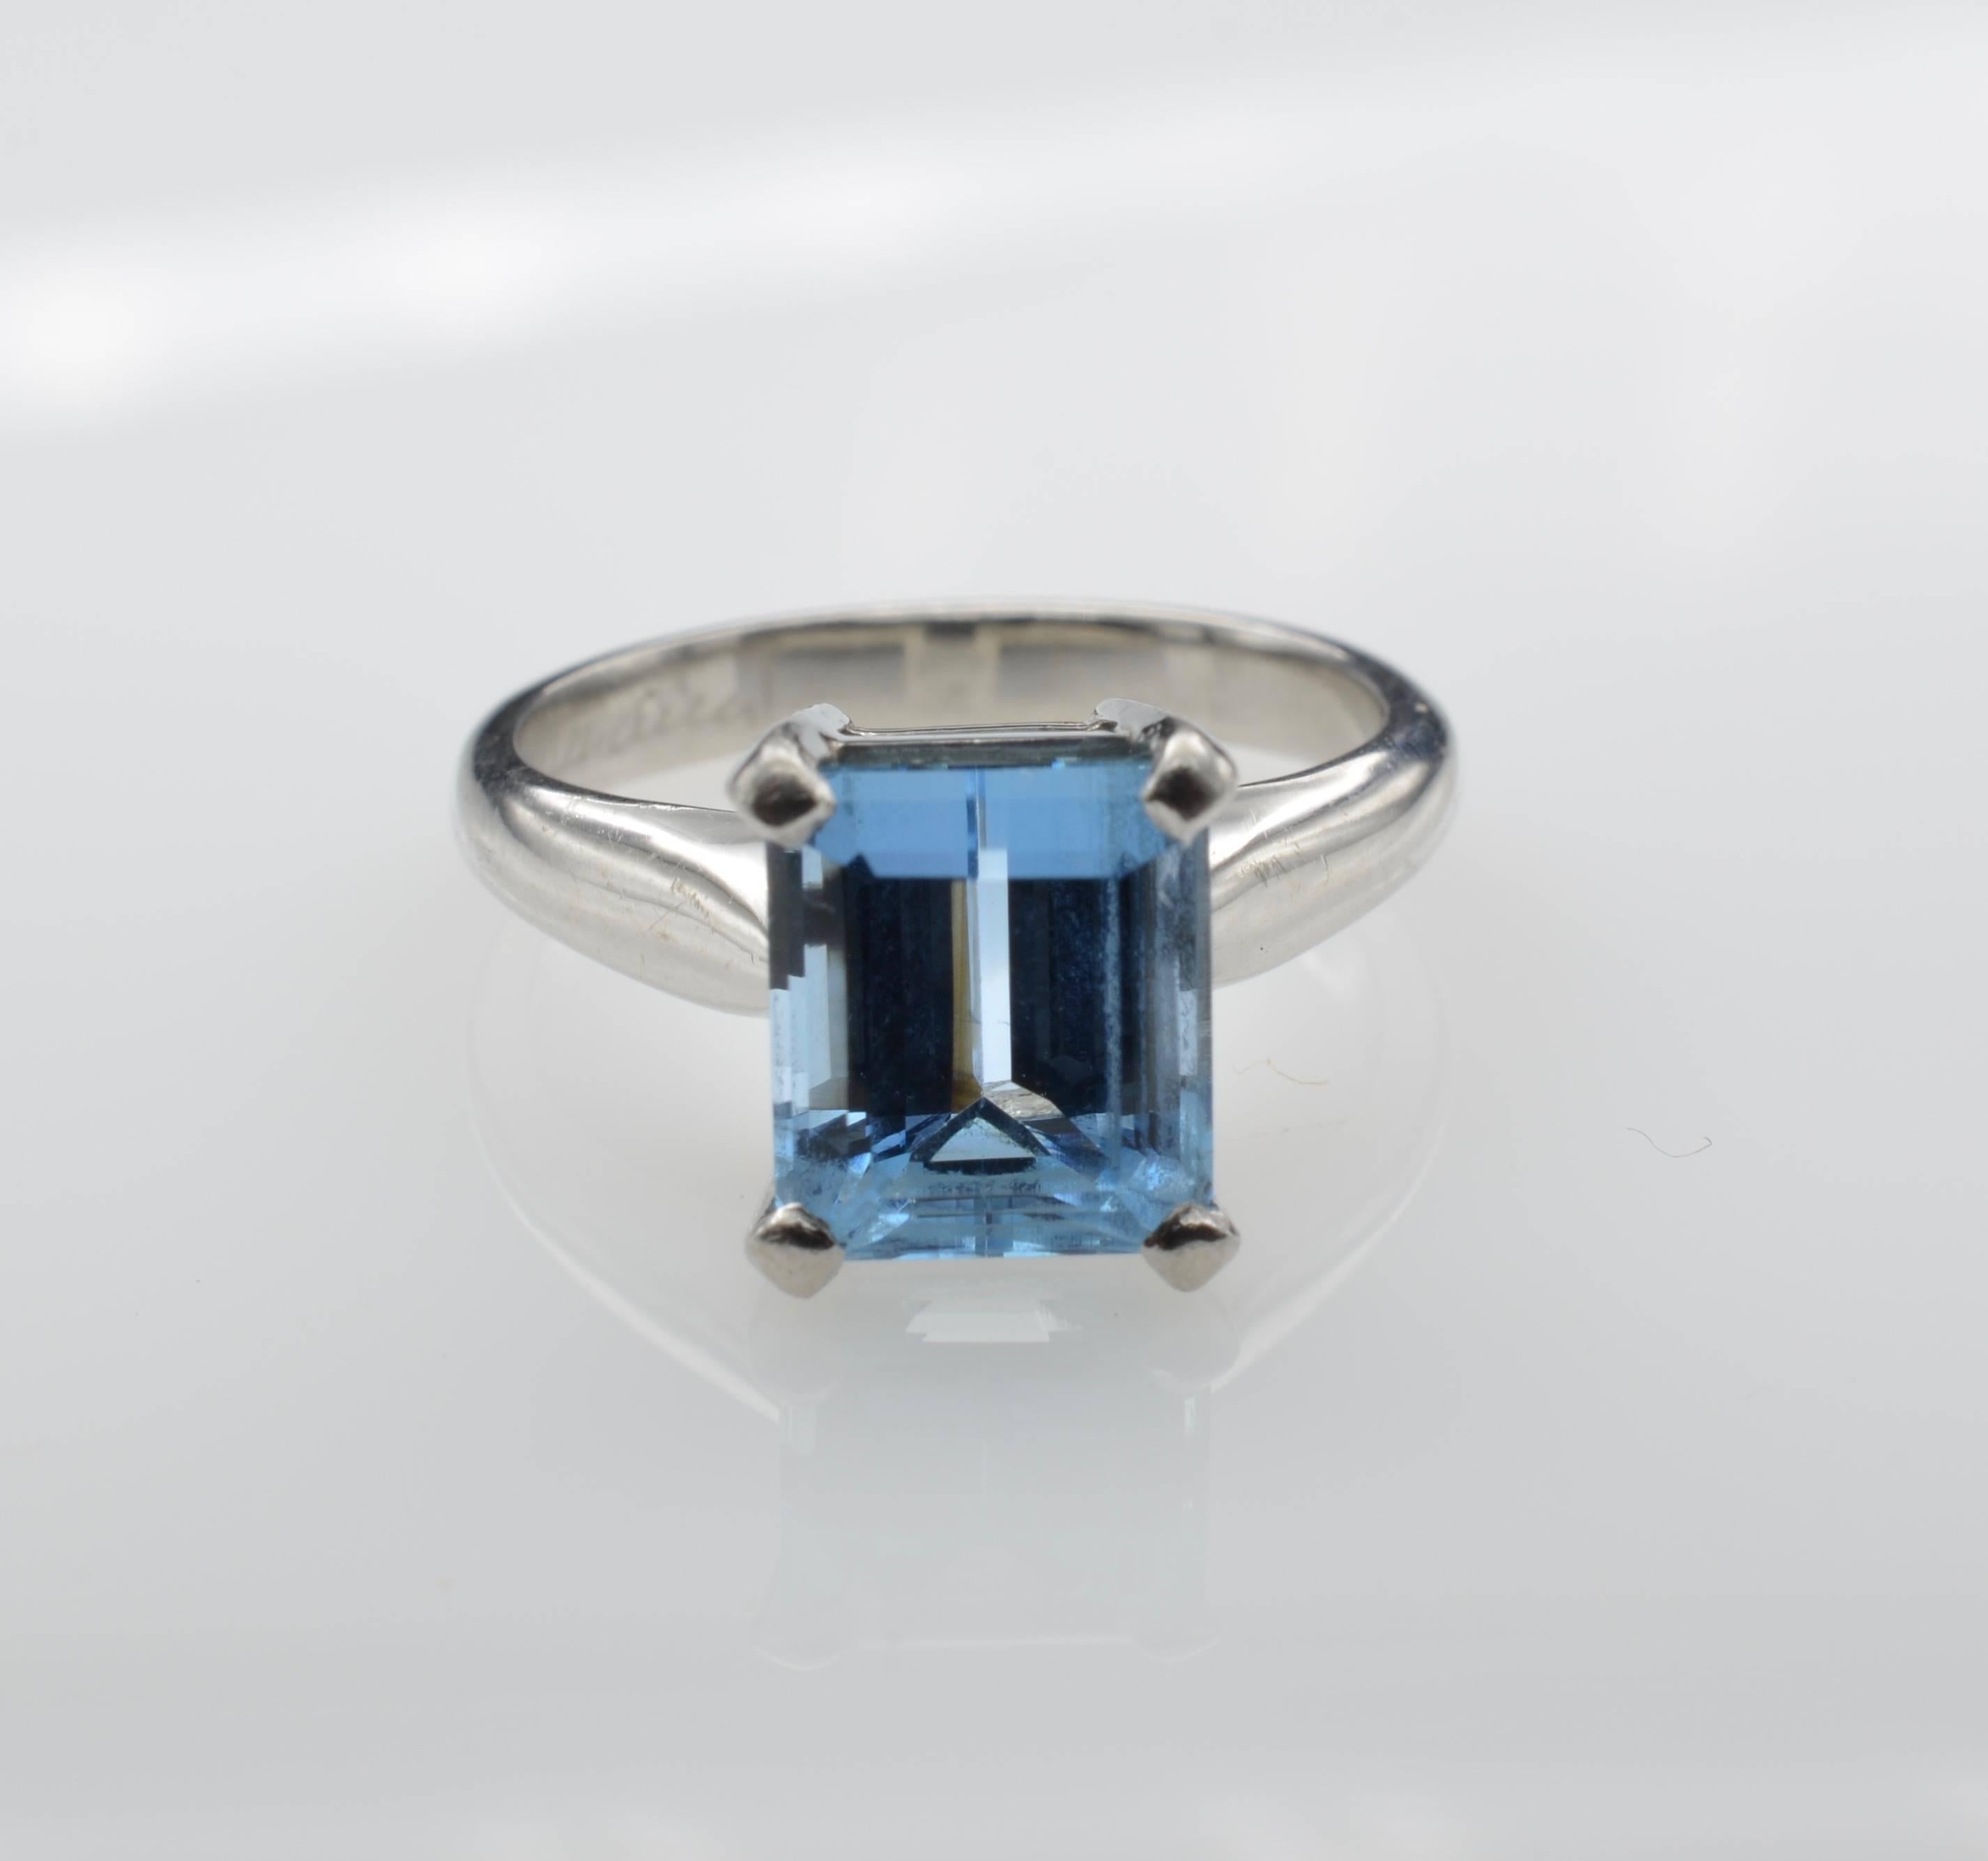 This stunning emerald cut aquamarine is 2.82 carats VVS clarity. The size of the stone measures 8.5 x 7.35 x 5.7mm. The platinum mounting beautifully accents the deep blue color of the aquamarine. It is simply elegant and timeless. The ring is a